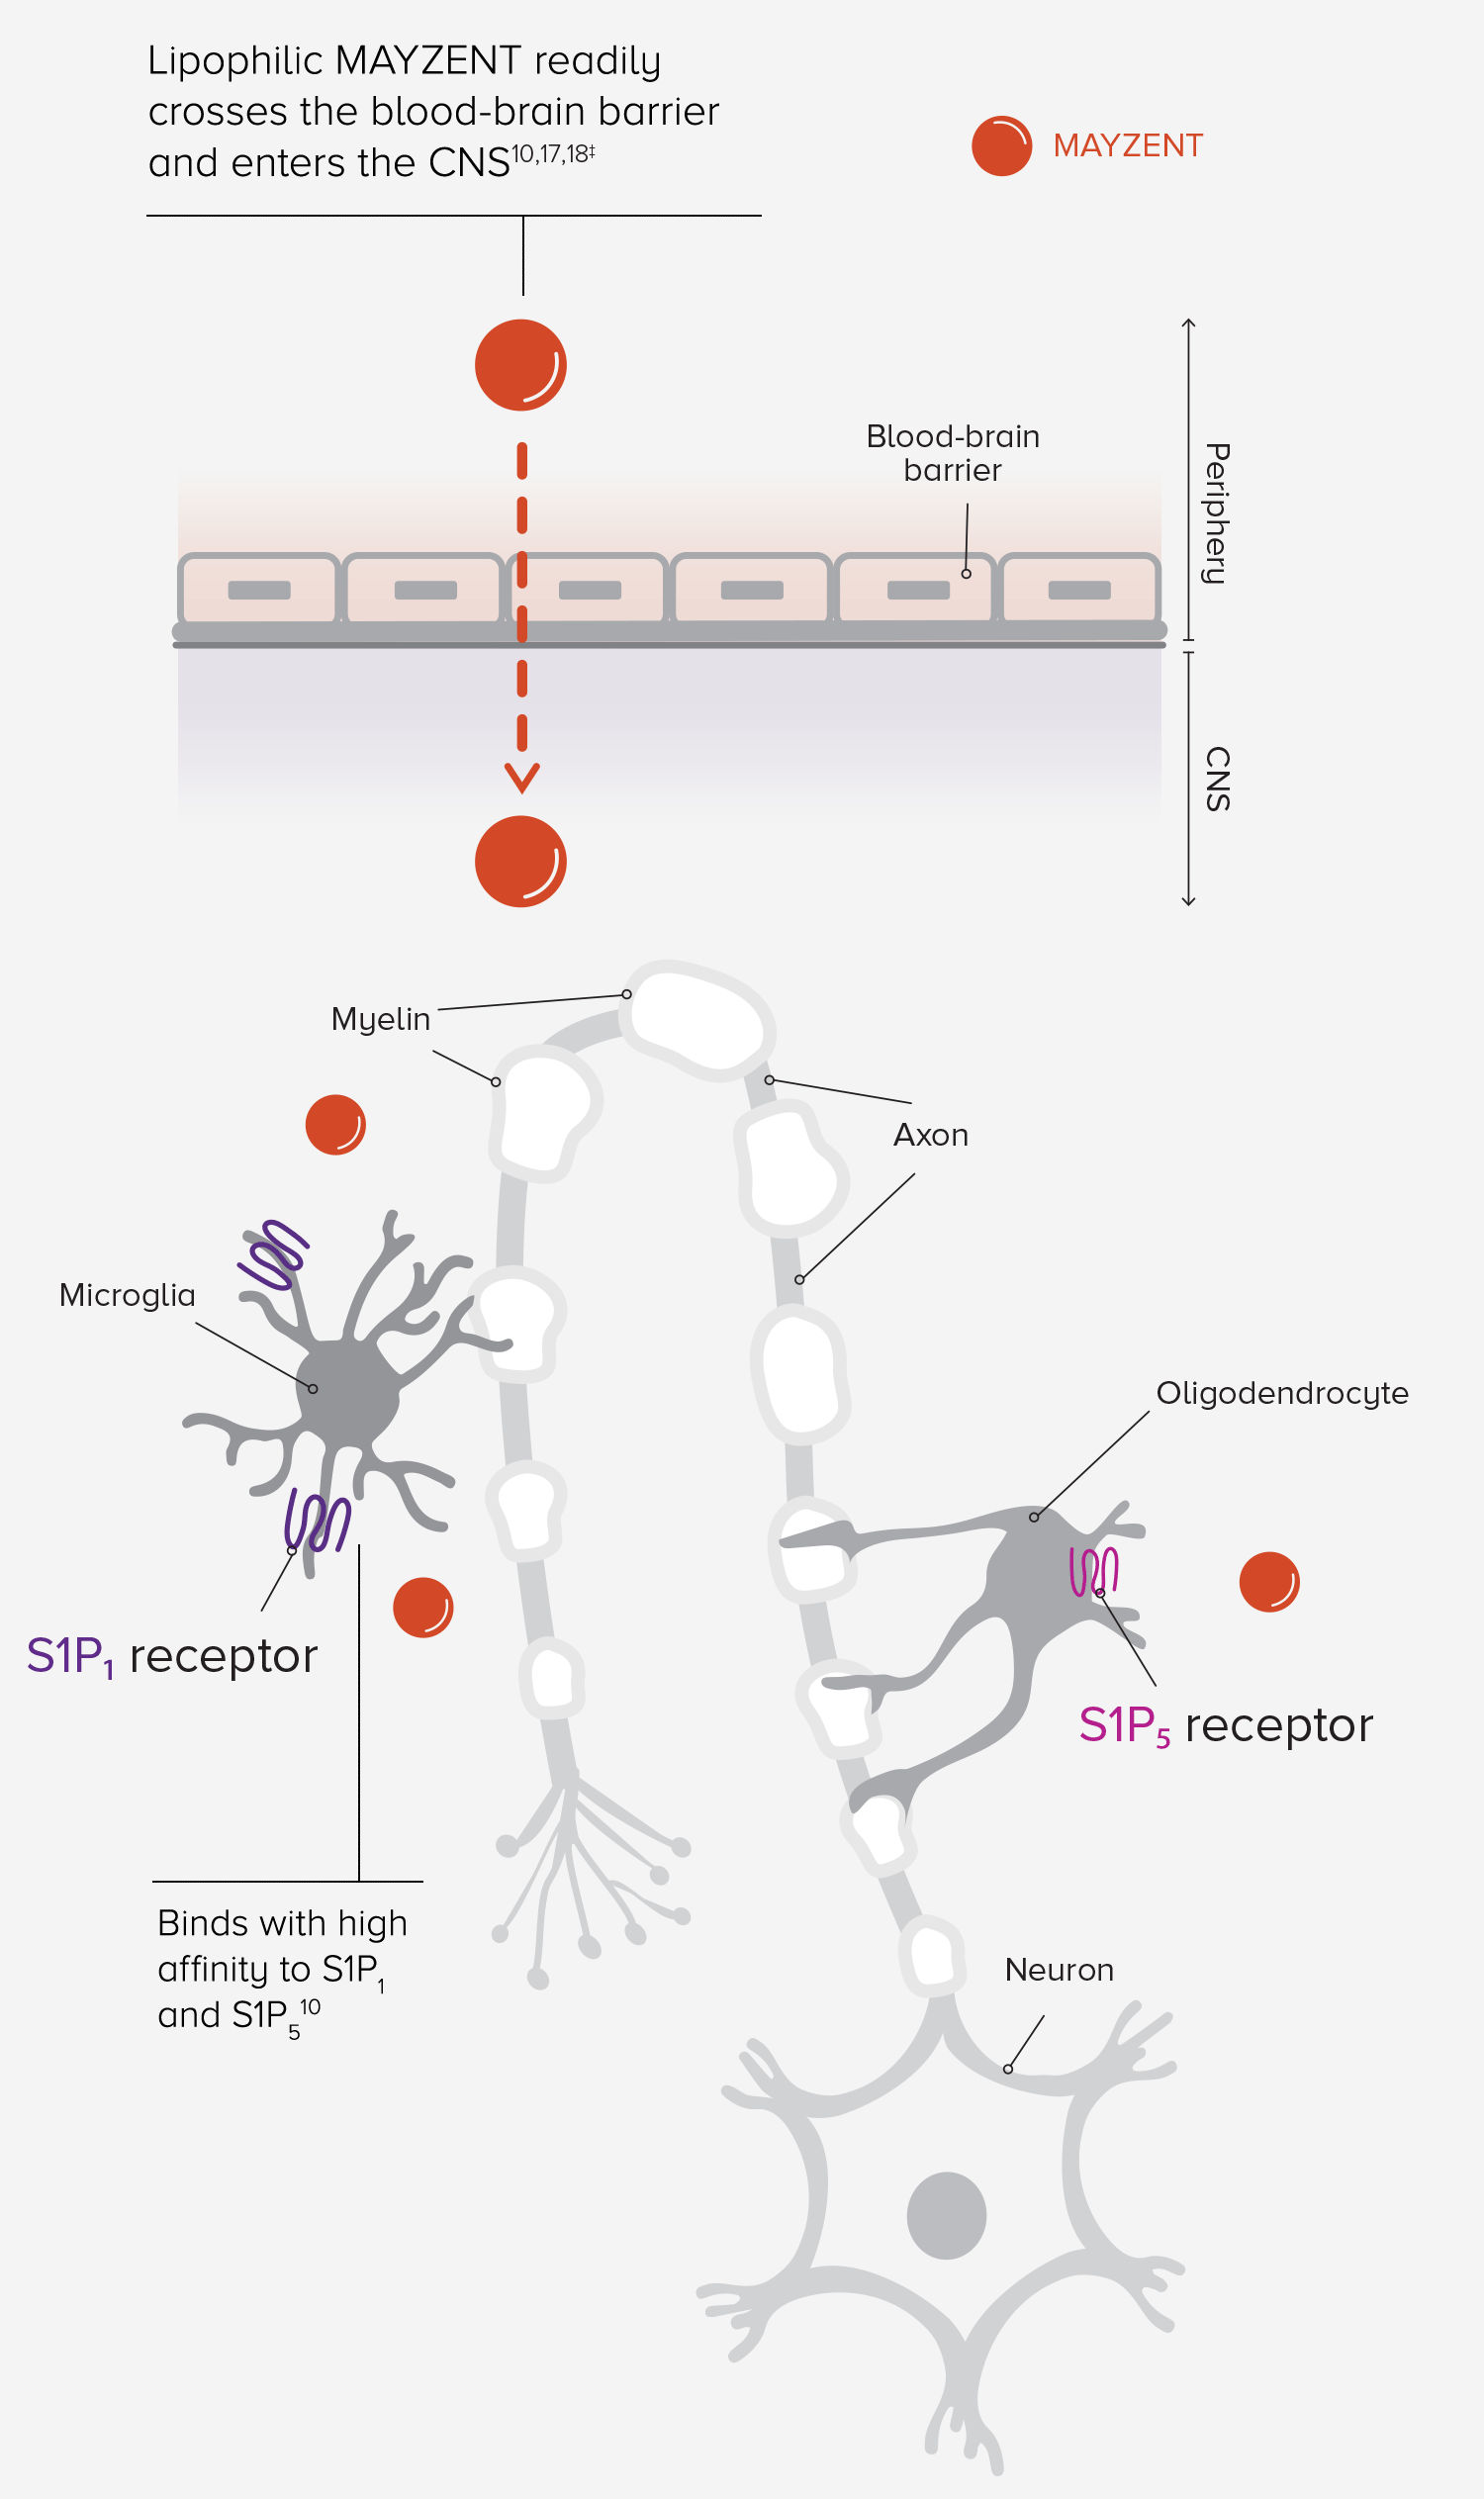 The Dual MOA of MAYZENT targets S1P1,5—2 key receptors thought to play a role in RMS inflammation and neurodegeneration